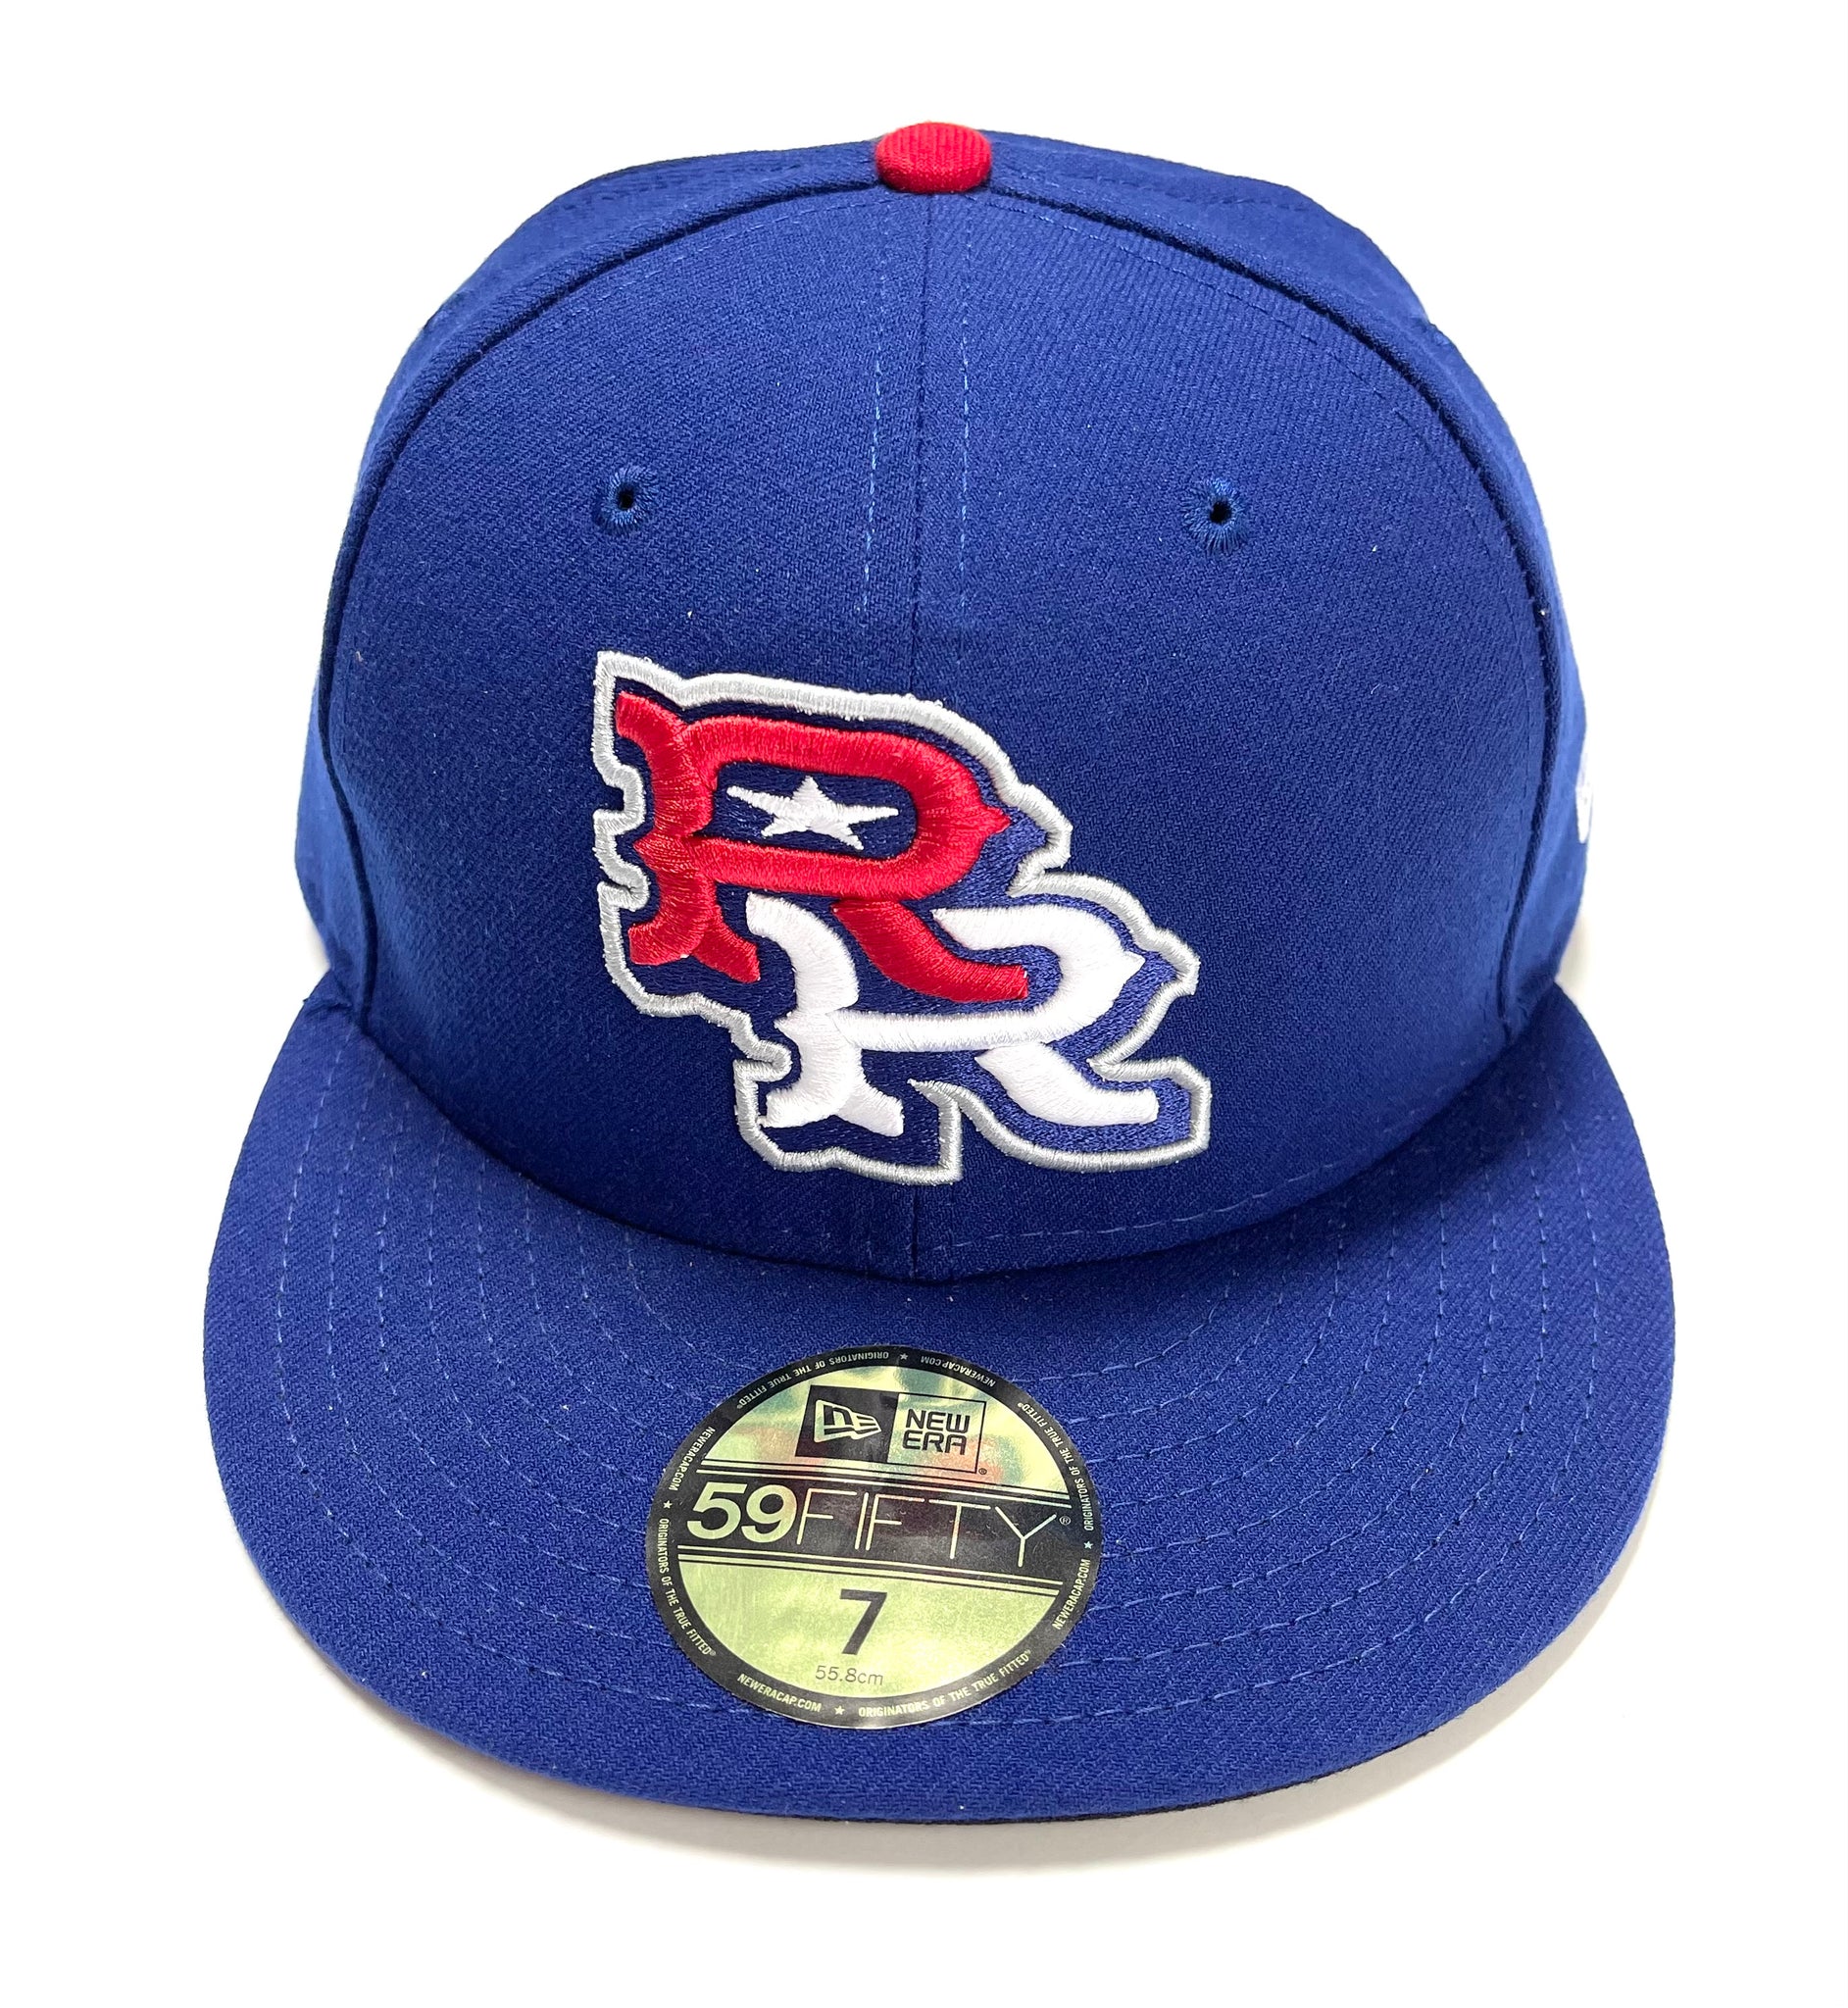 NEW ERA ROAD OF ROUND ROCK EXPRESS FITTED HAT(ROYAL BLUE) – So